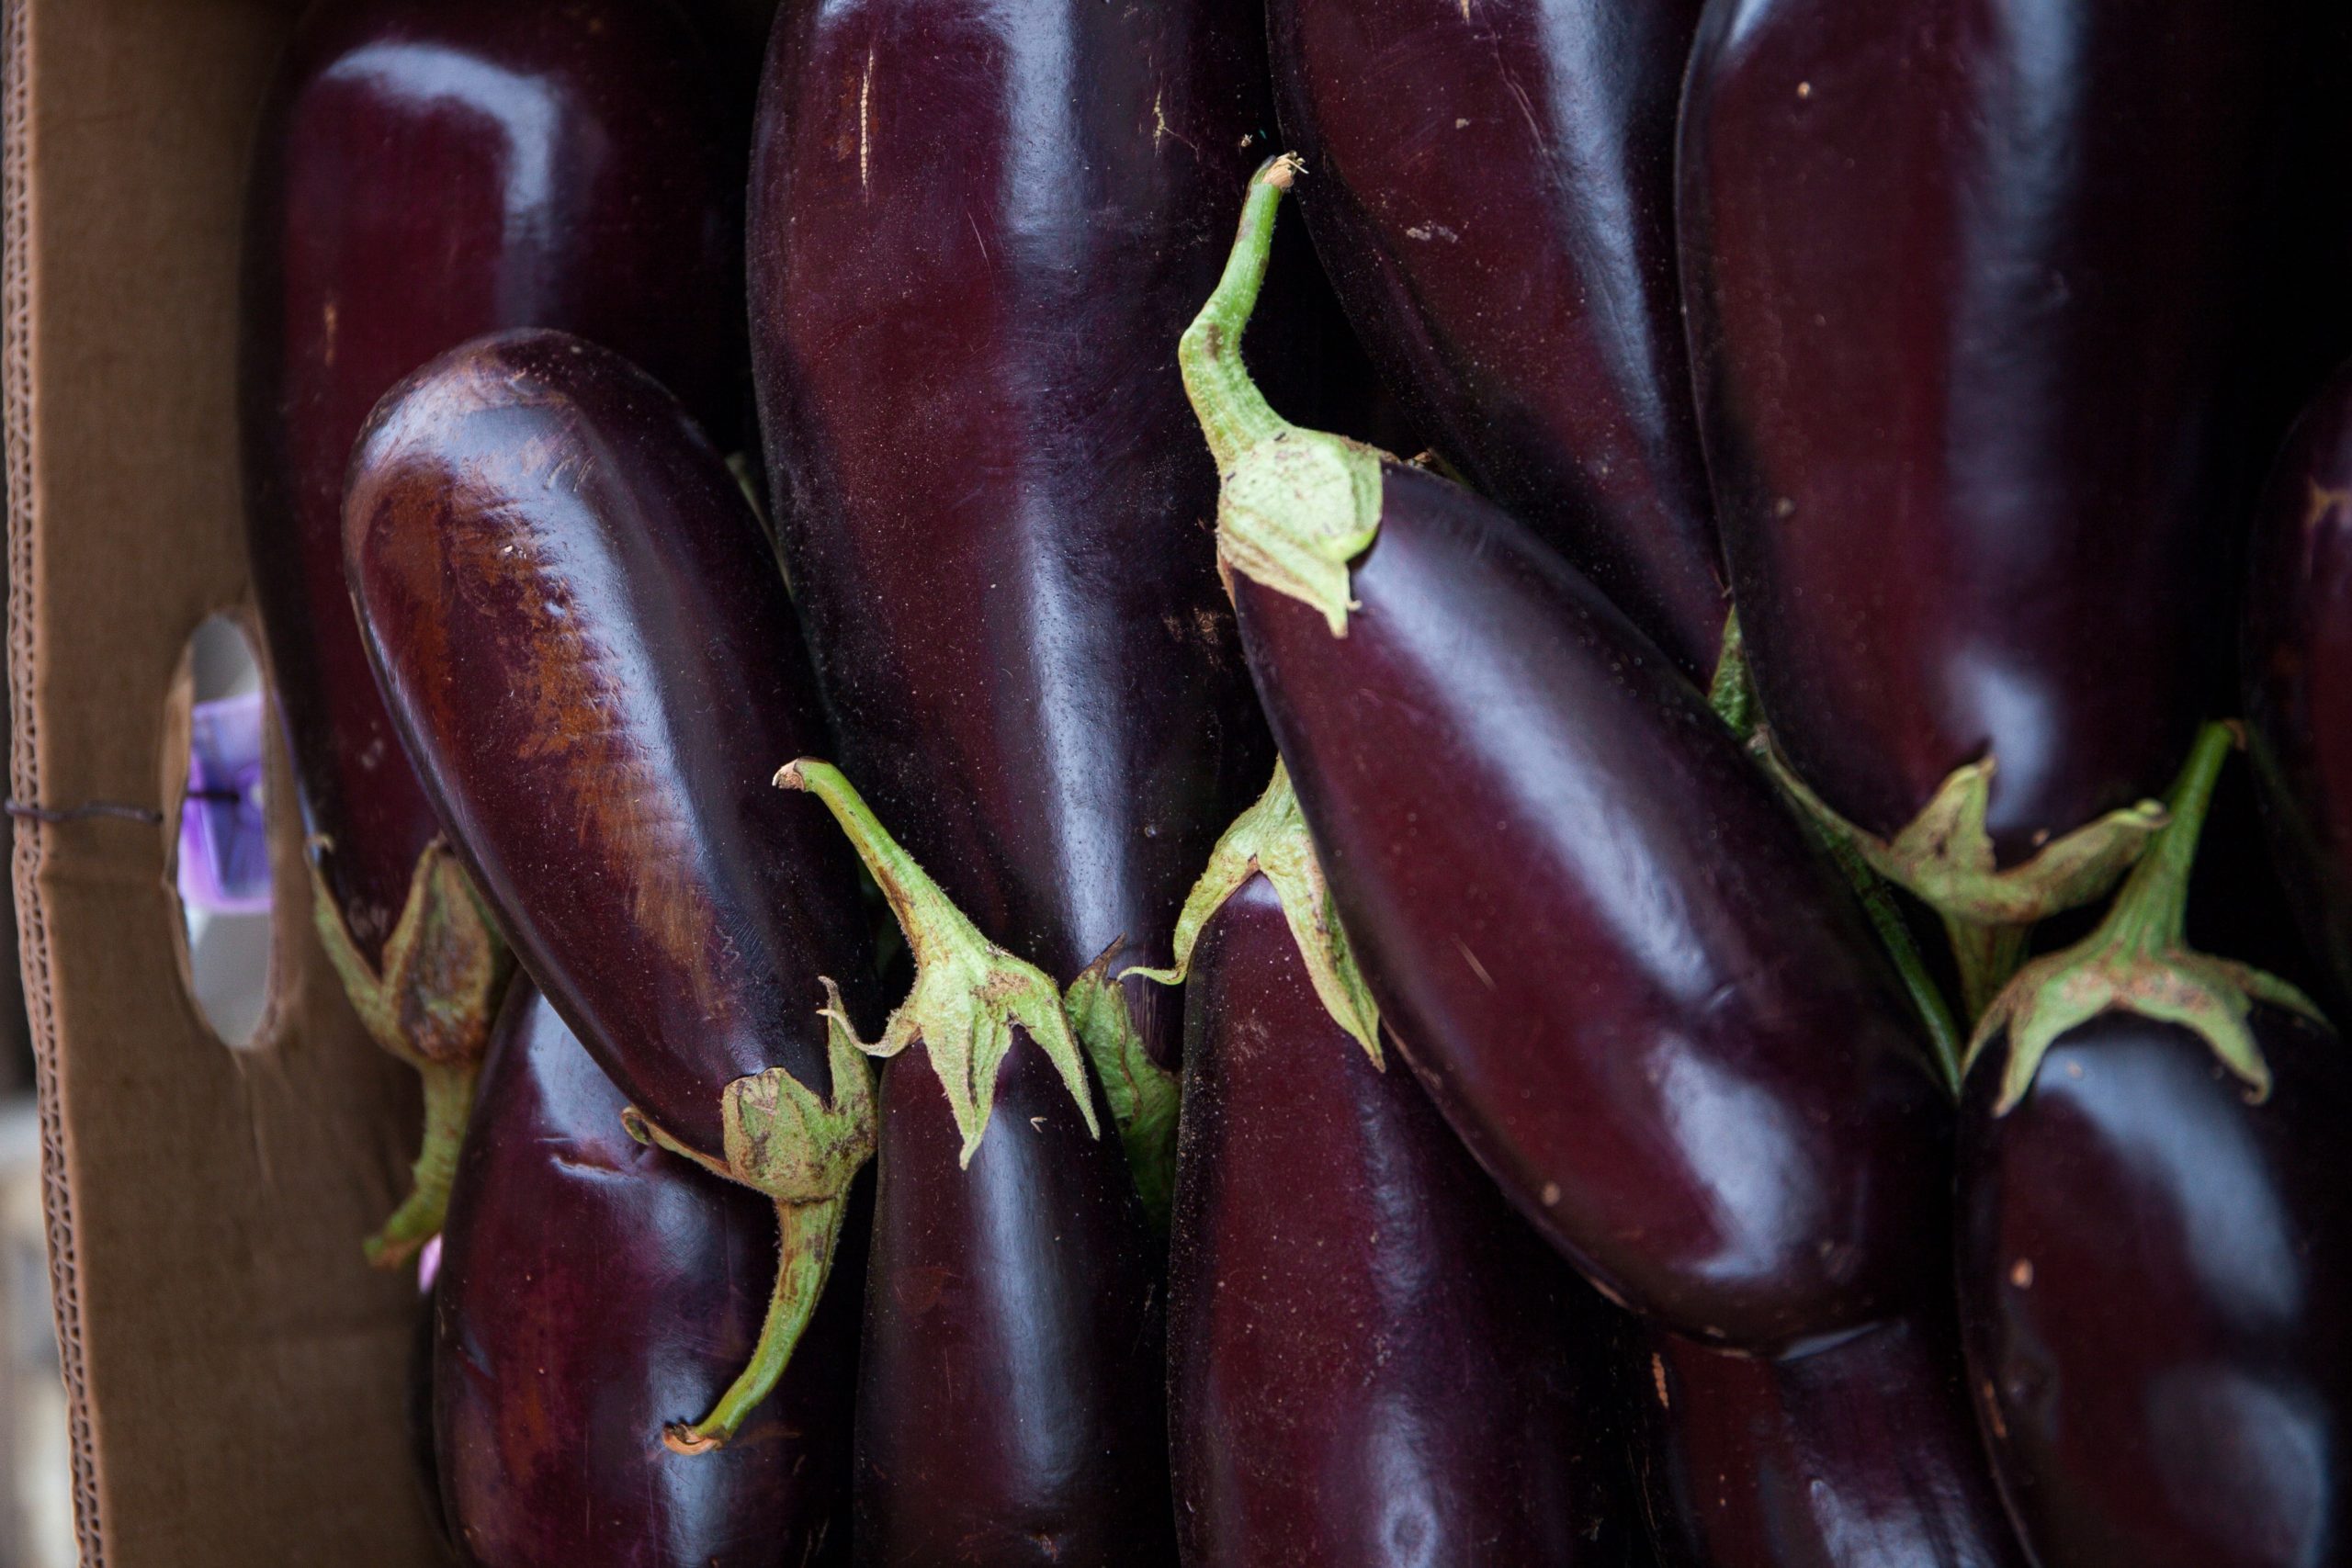 Can dogs have eggplant? How safe is it really?